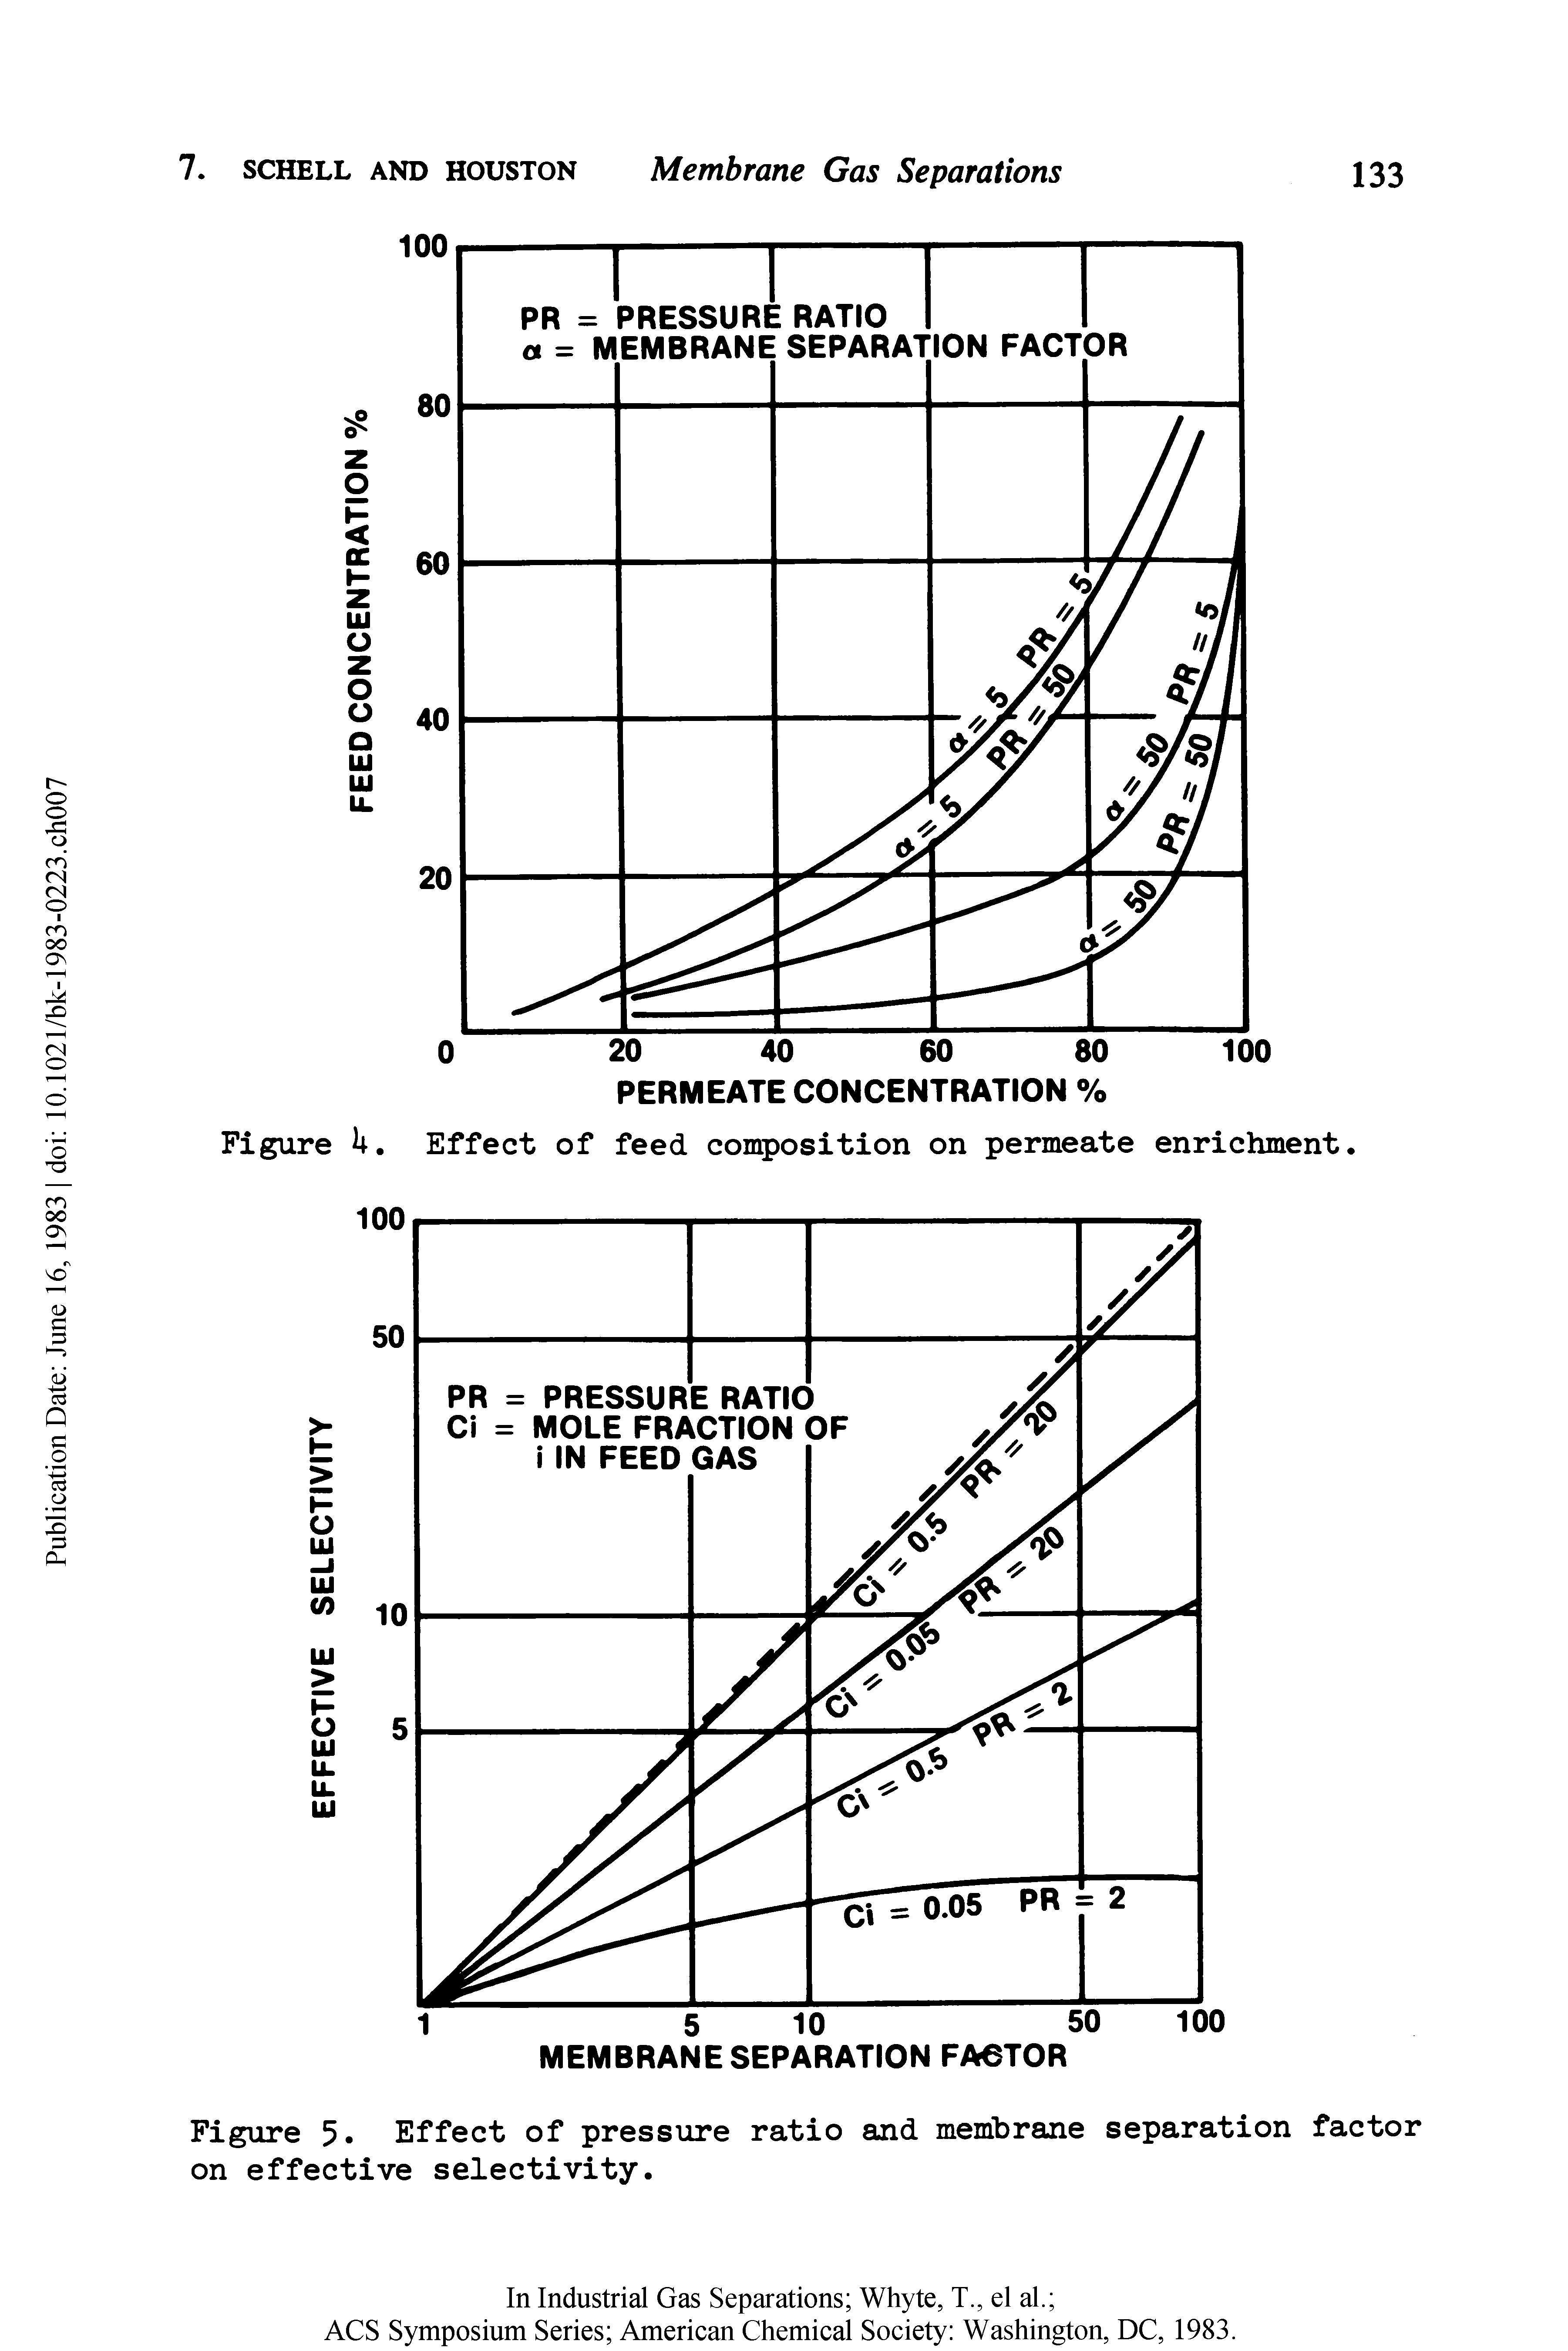 Figure U. Effect of feed composition on permeate enrichment.